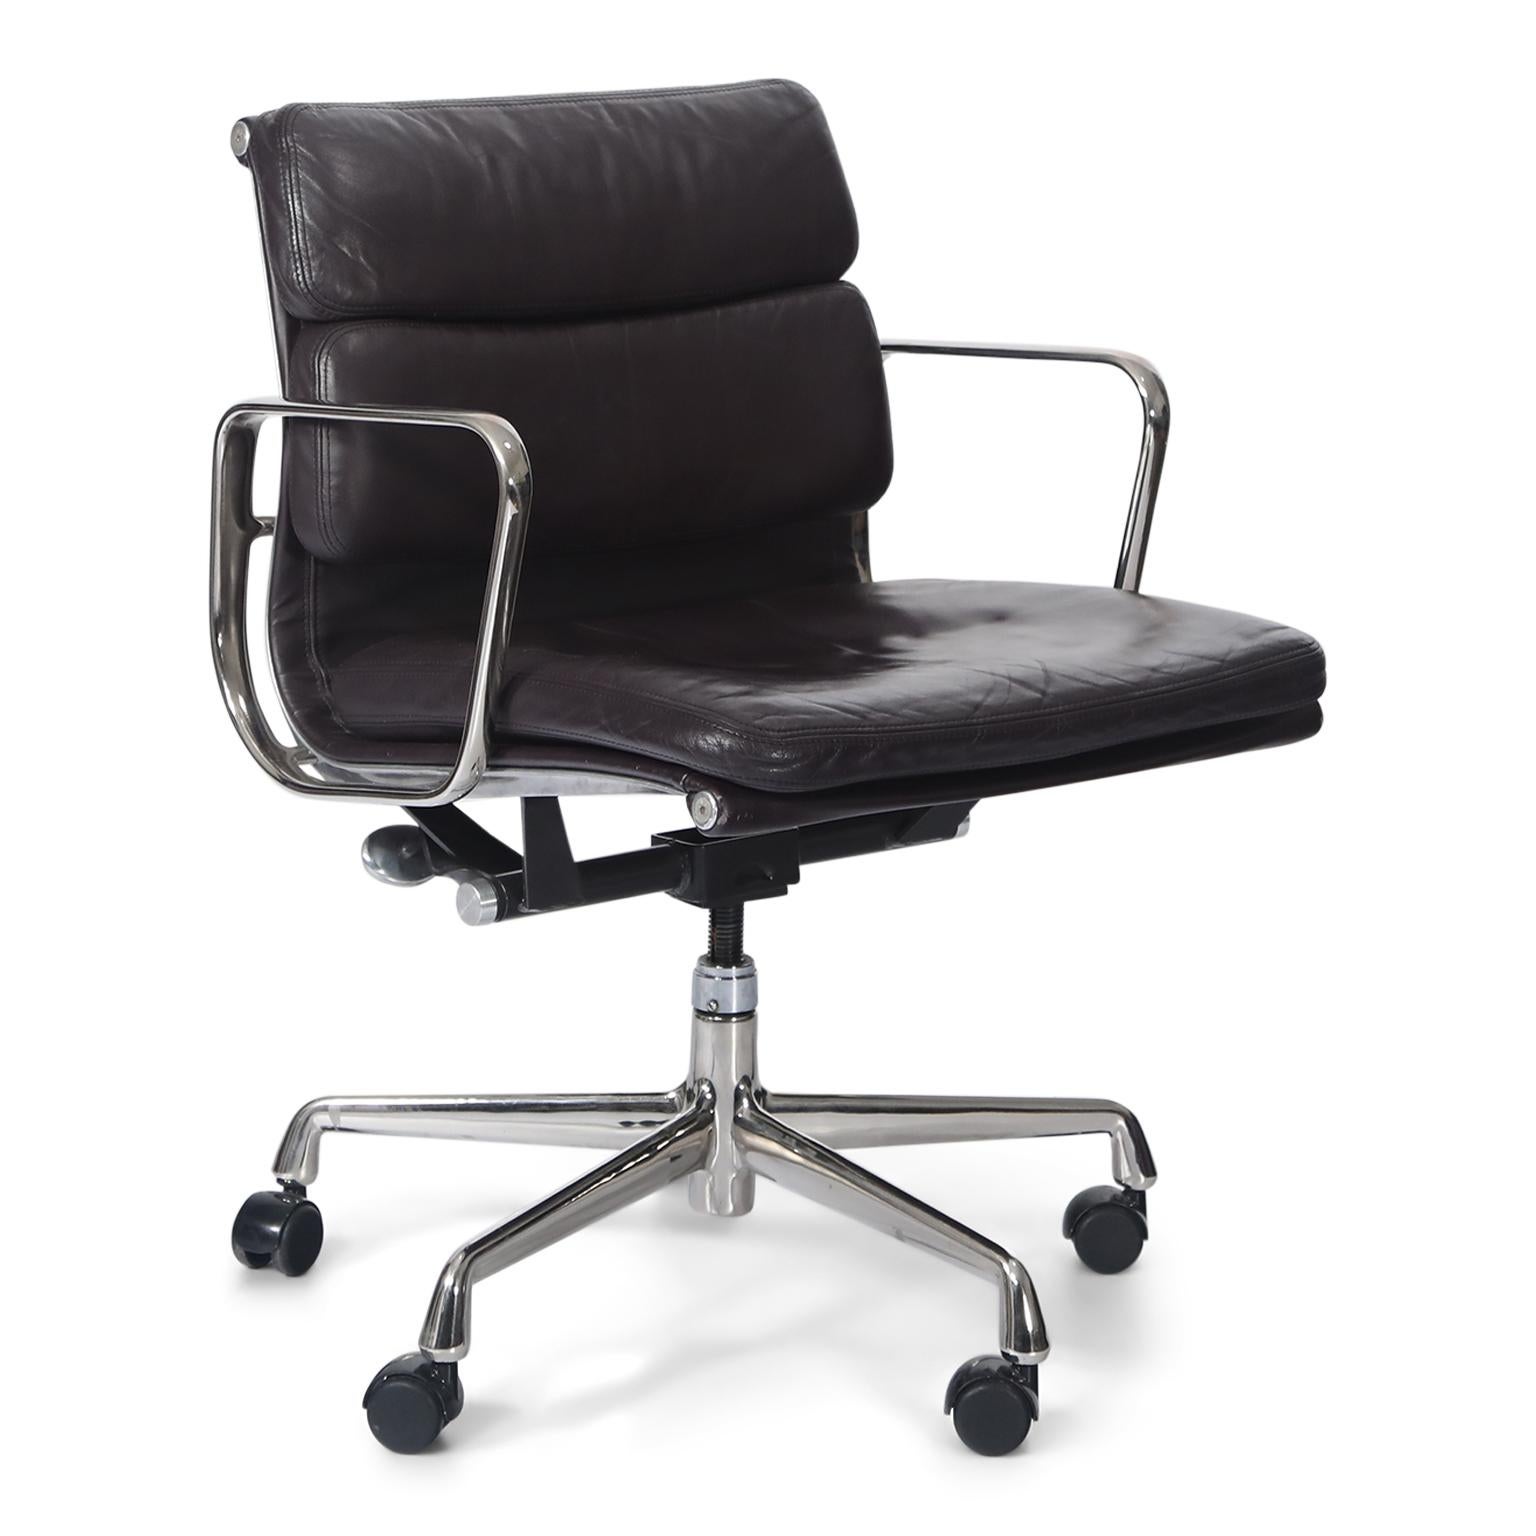 Late 20th Century Charles Eames for Herman Miller Auburgine Soft Pad Management Chair, circa 1980